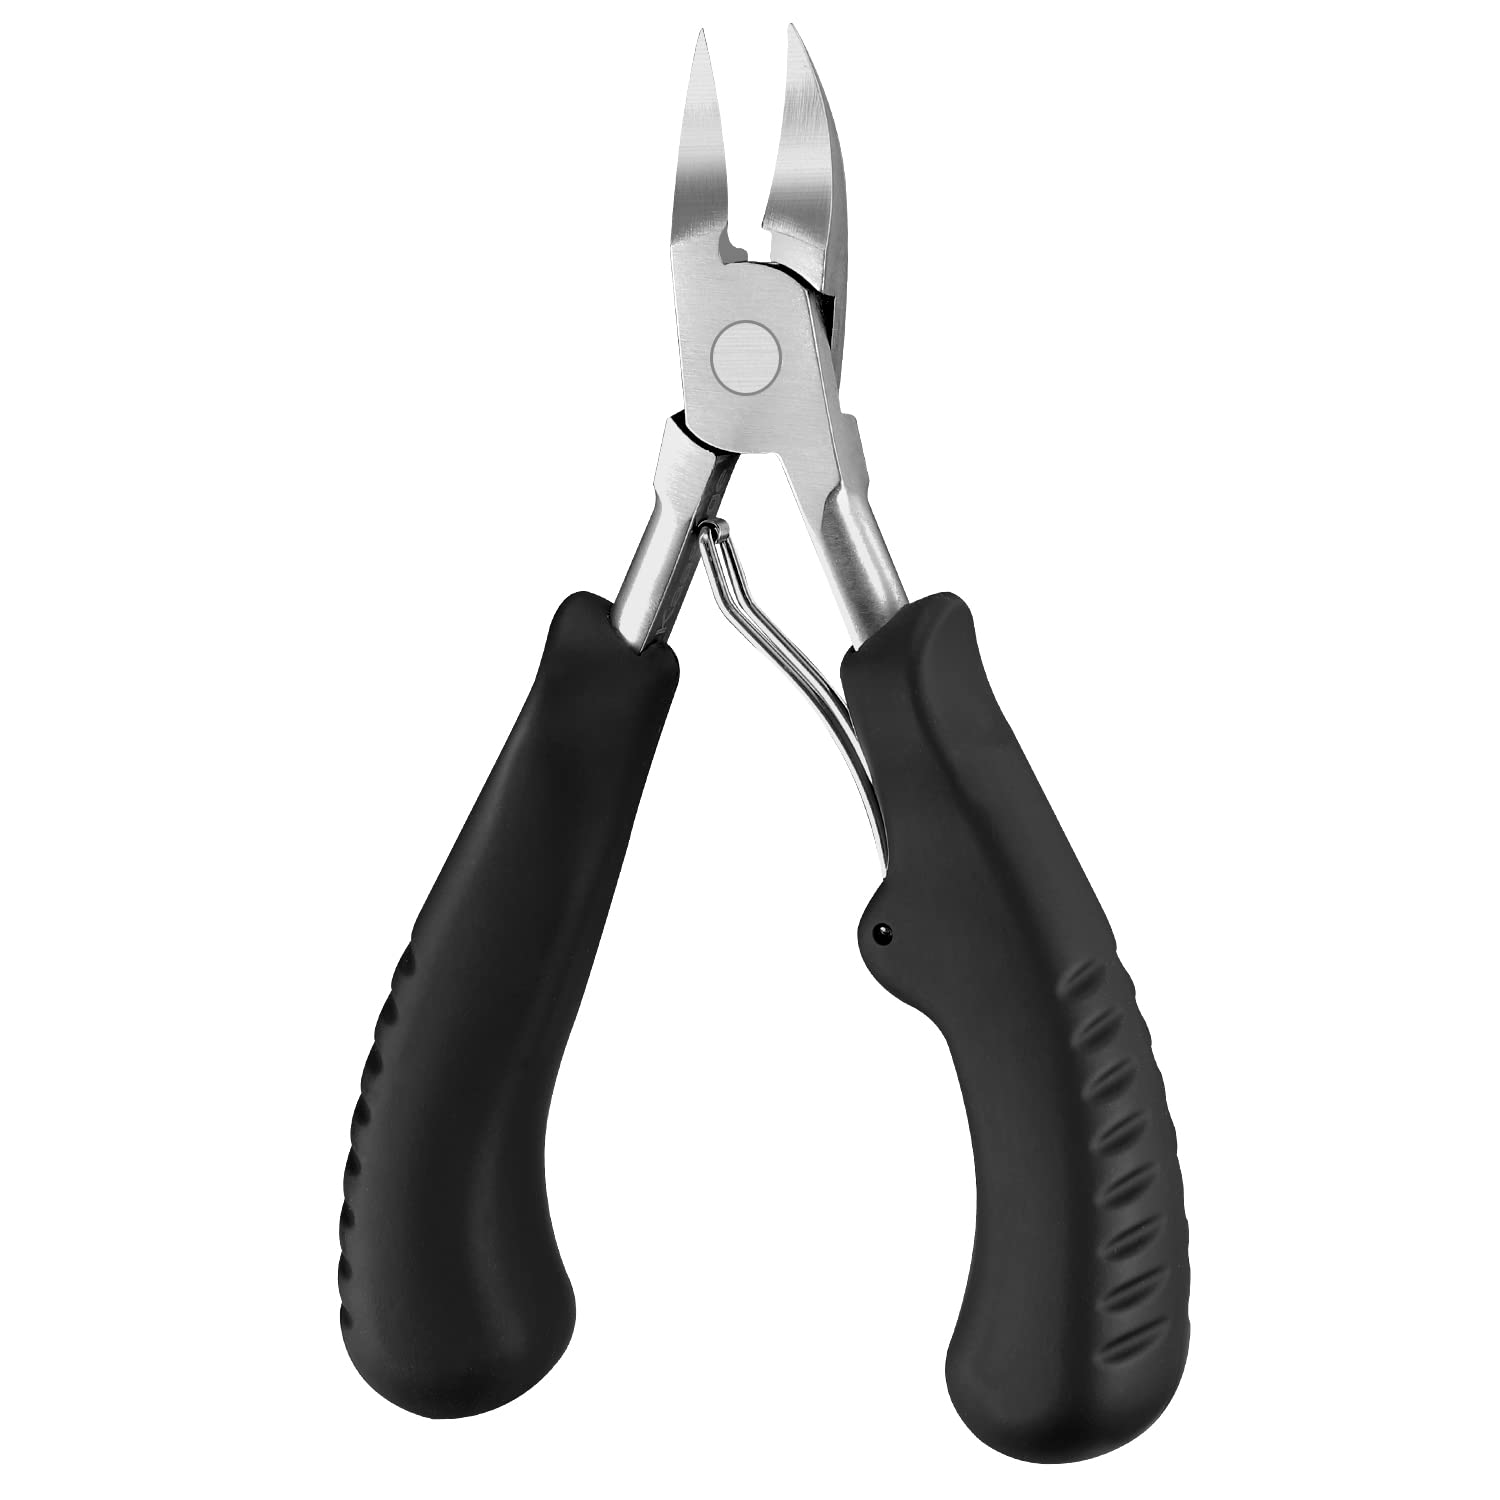 A pair of black and silver nail clippers for thick and ingrown nails.